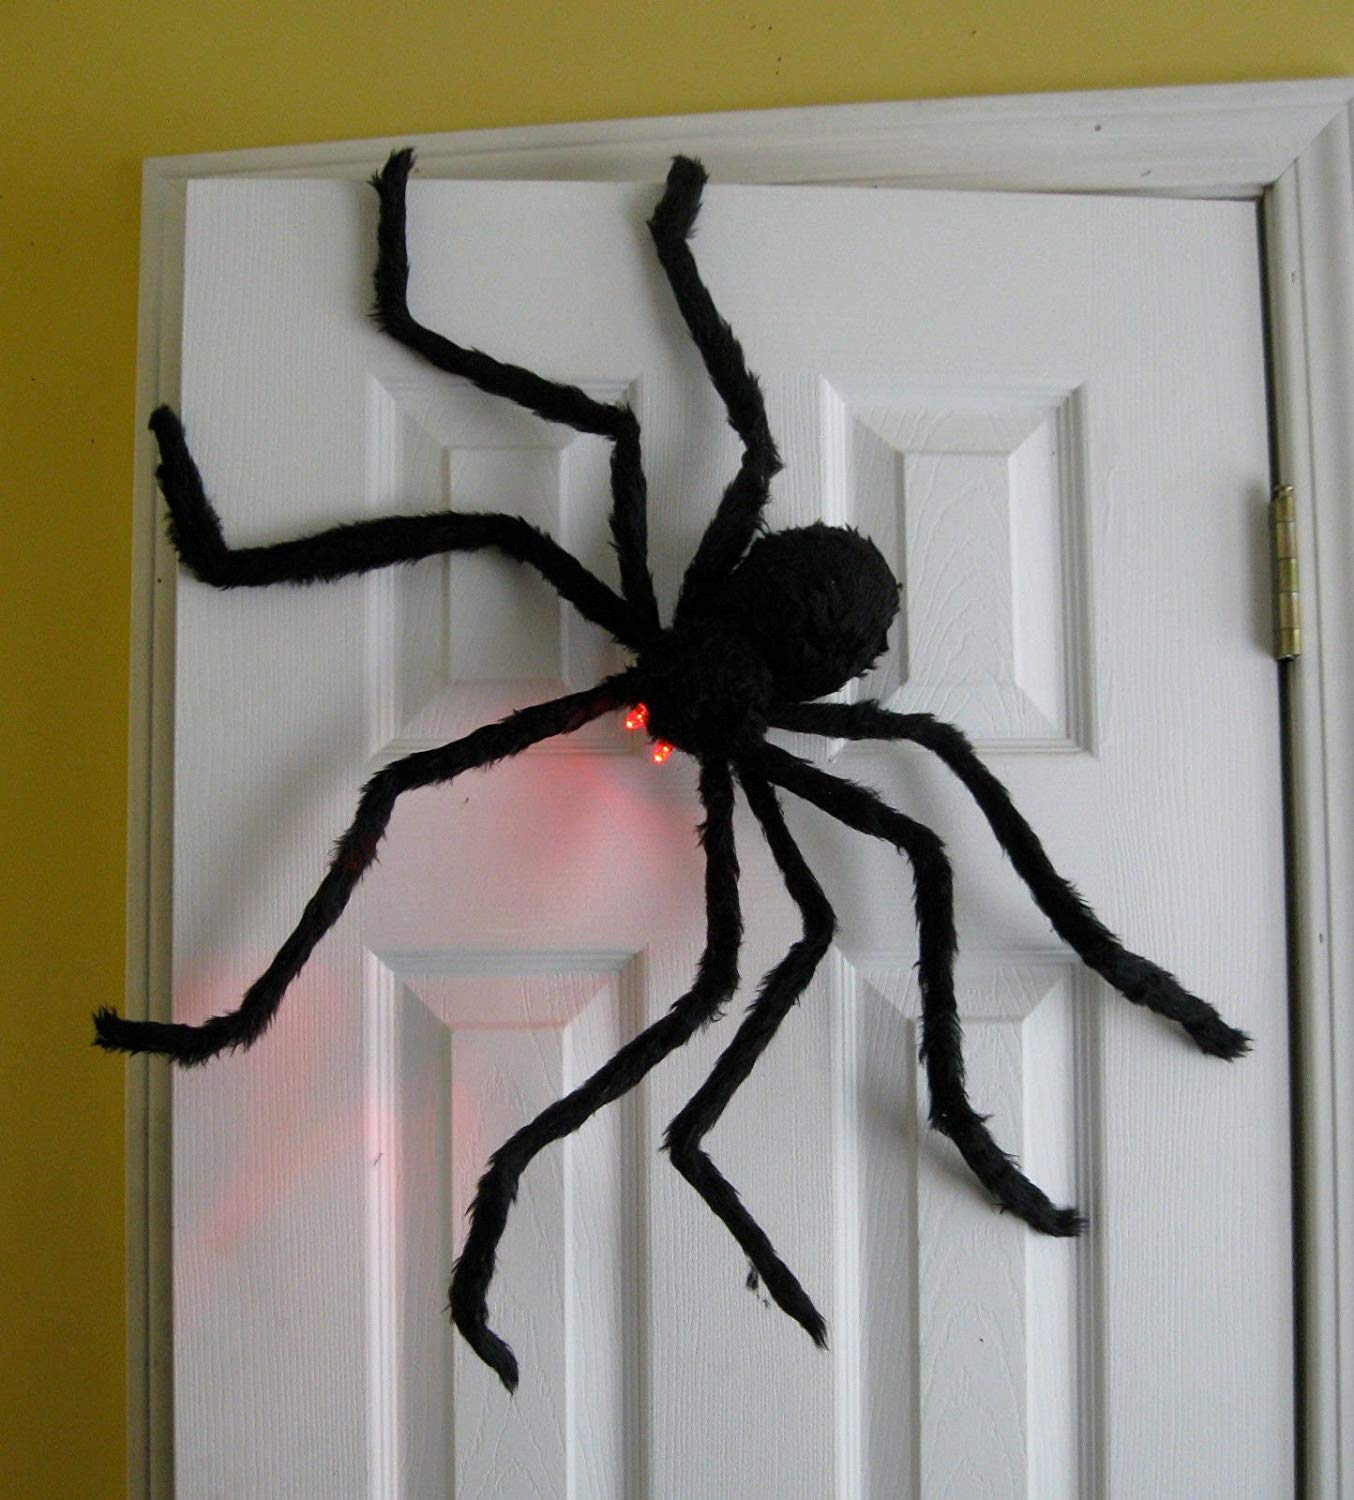 Give your guests the creeps with this oversized Creepy Crawly Spider! Spooky Halloween decorations ideas for indoor and outdoor decorations